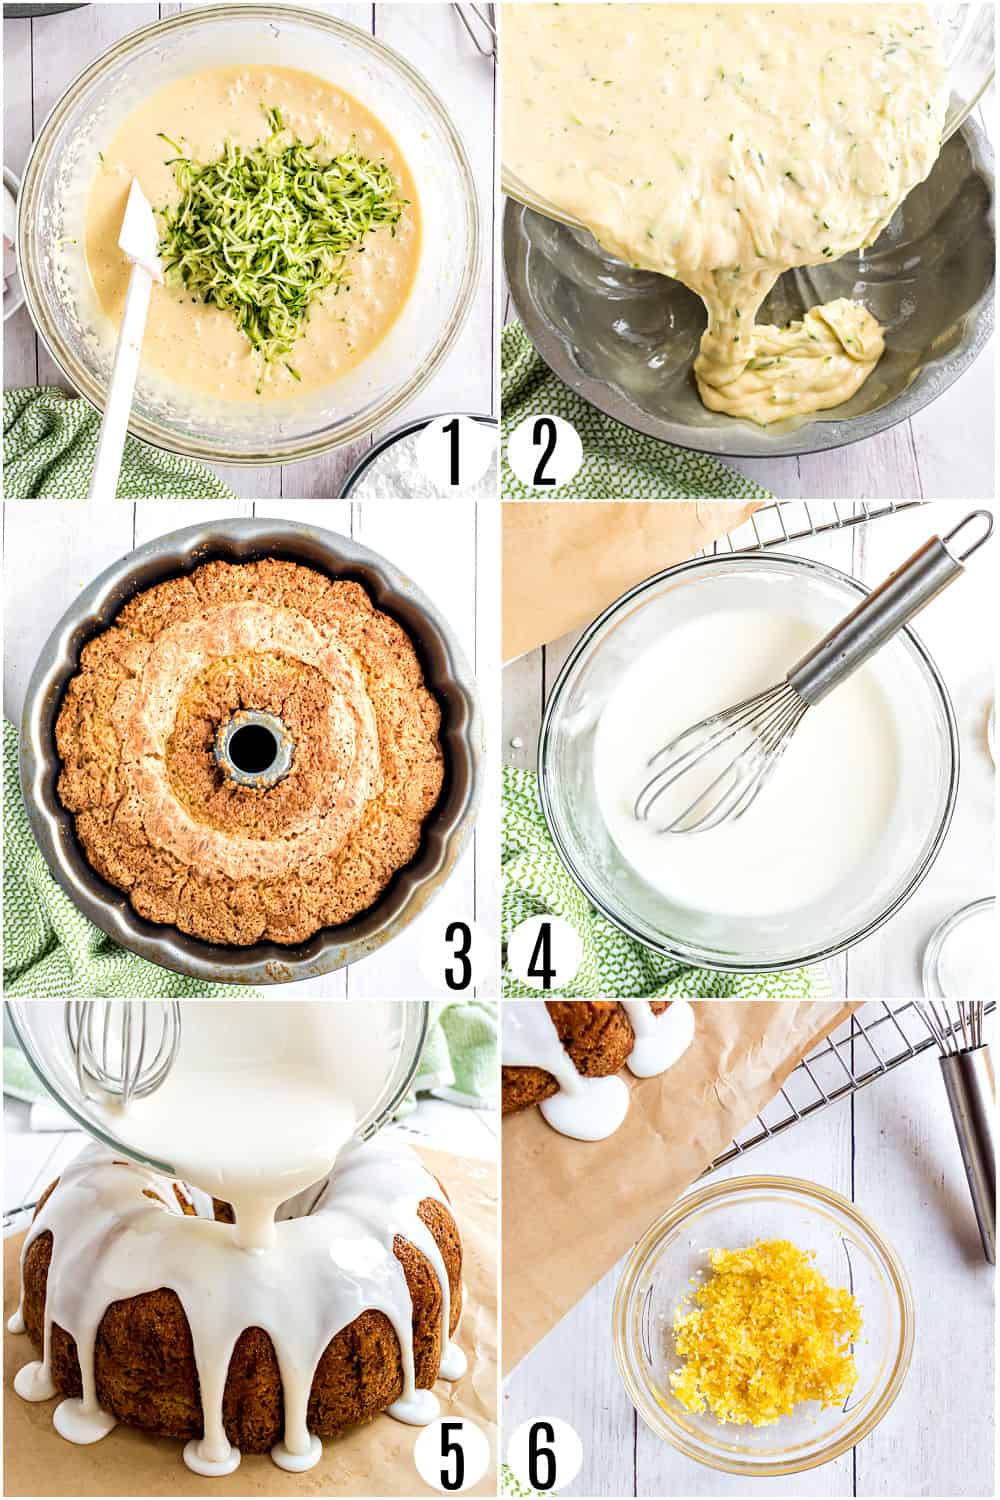 Step by step photos showing how to make lemon zucchini bundt cake.